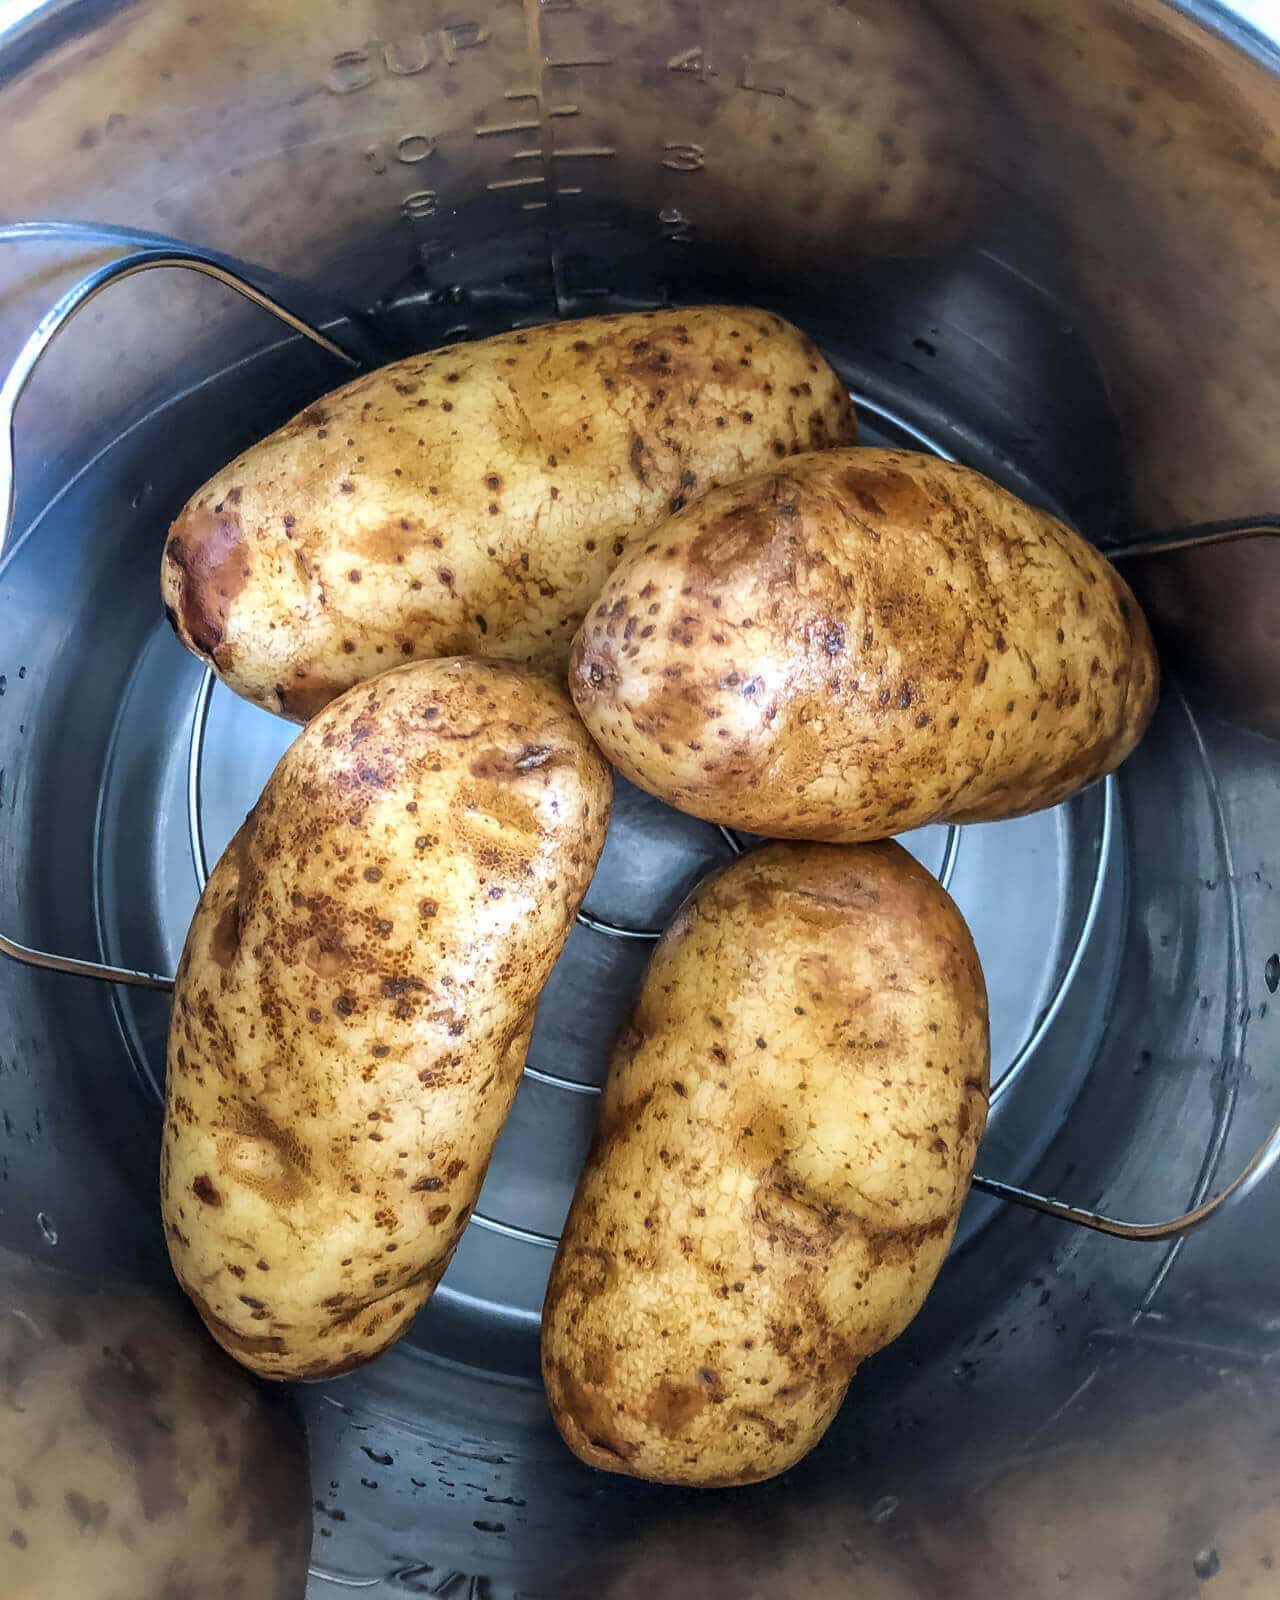 Four potatoes in the instant pot before cooking.